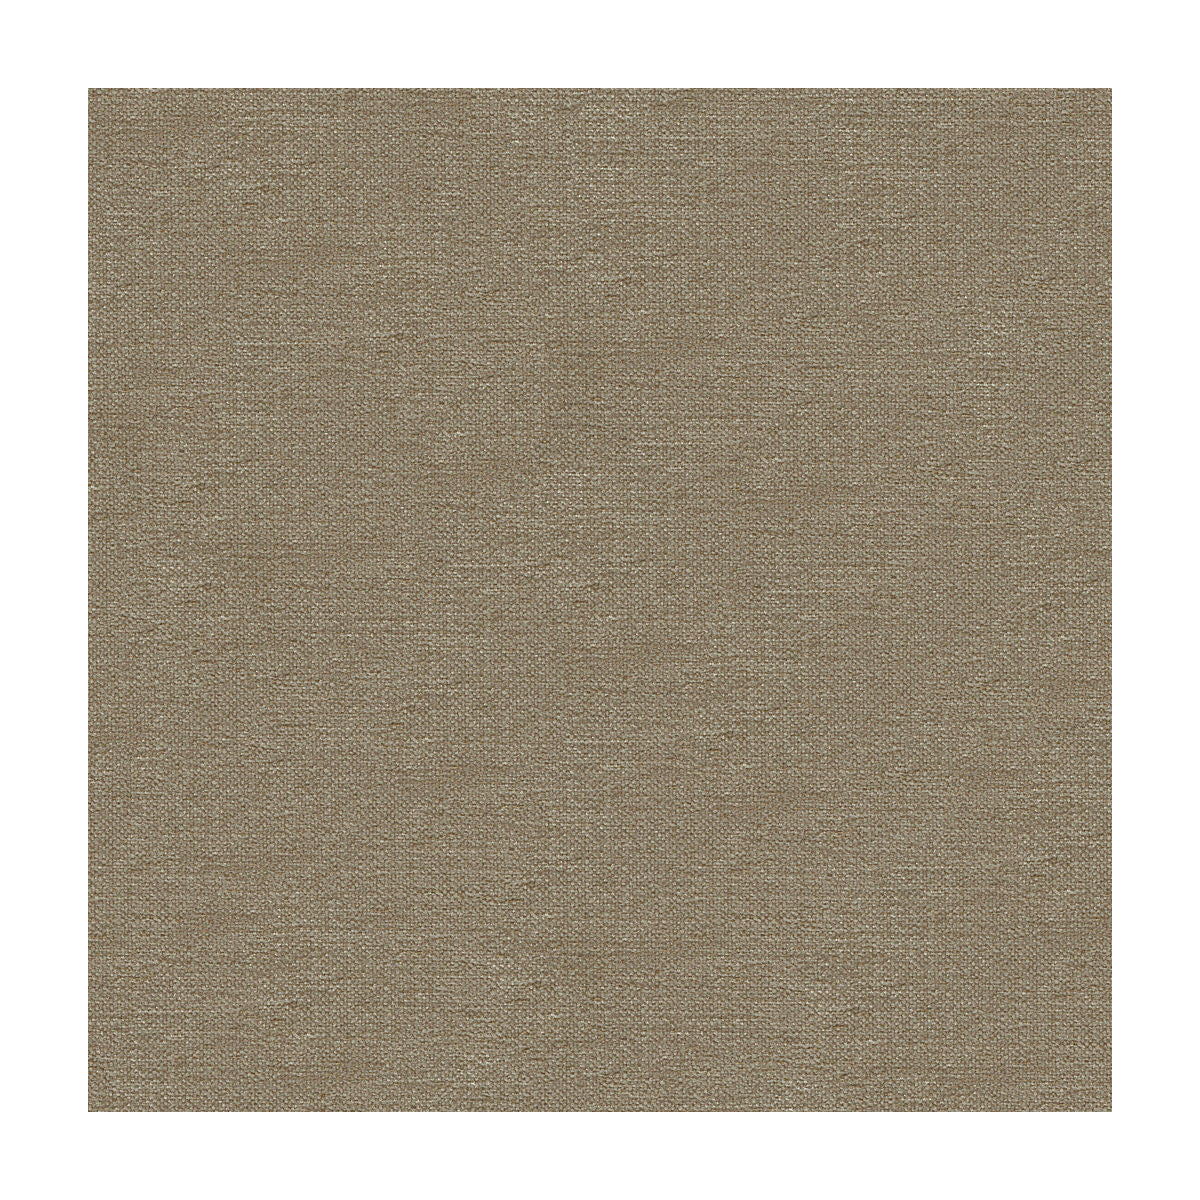 Kravet Smart fabric in 33831-106 color - pattern 33831.106.0 - by Kravet Smart in the Performance Crypton Home collection